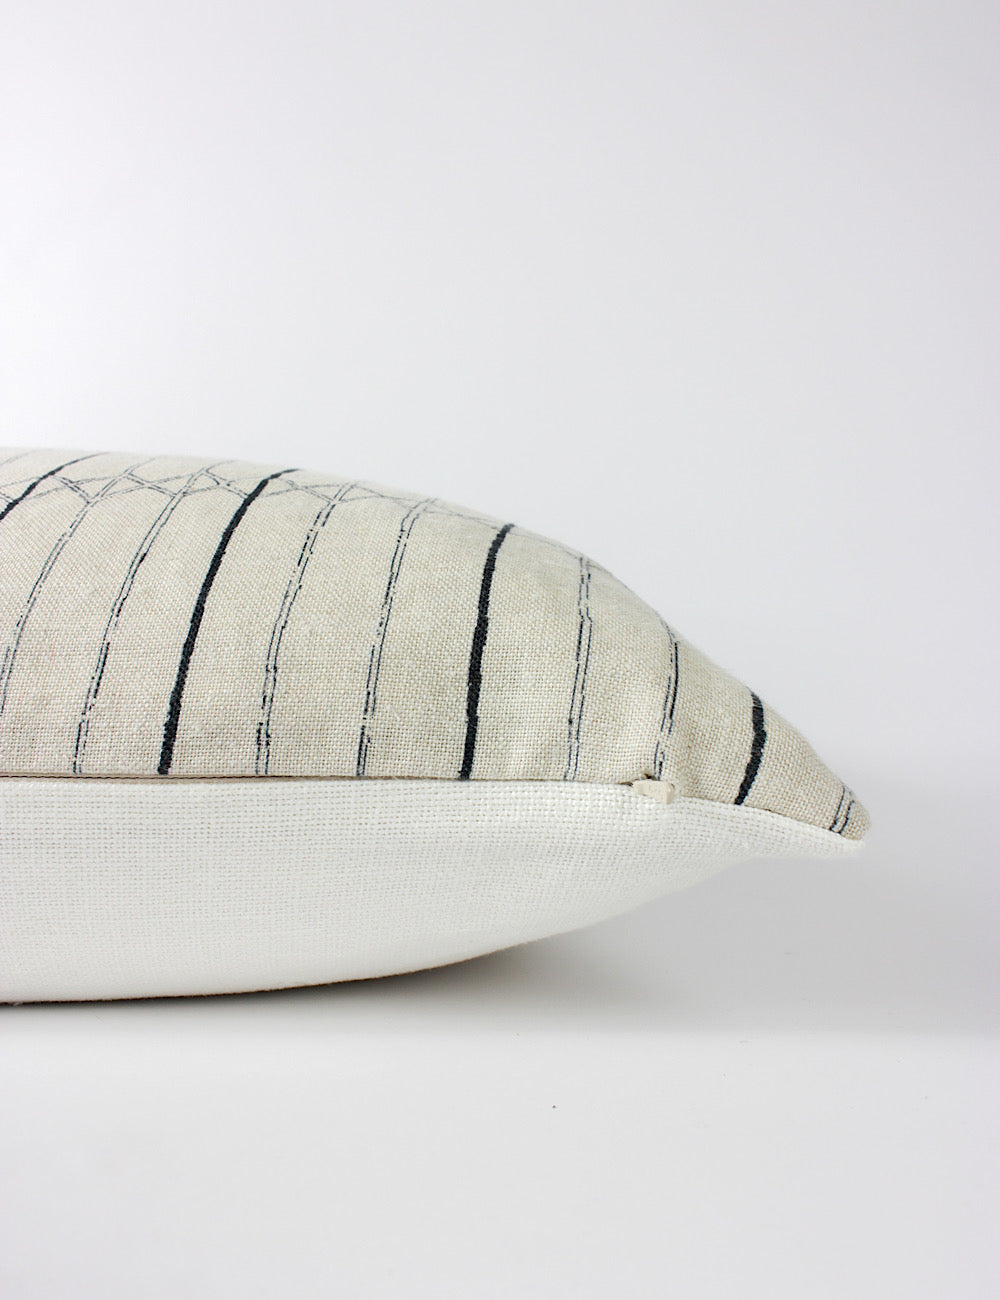 Side view of the Serena scatter cushion capturing its two-tone indigo striped pattern on the front and a plain off-white back and a hidden zip.